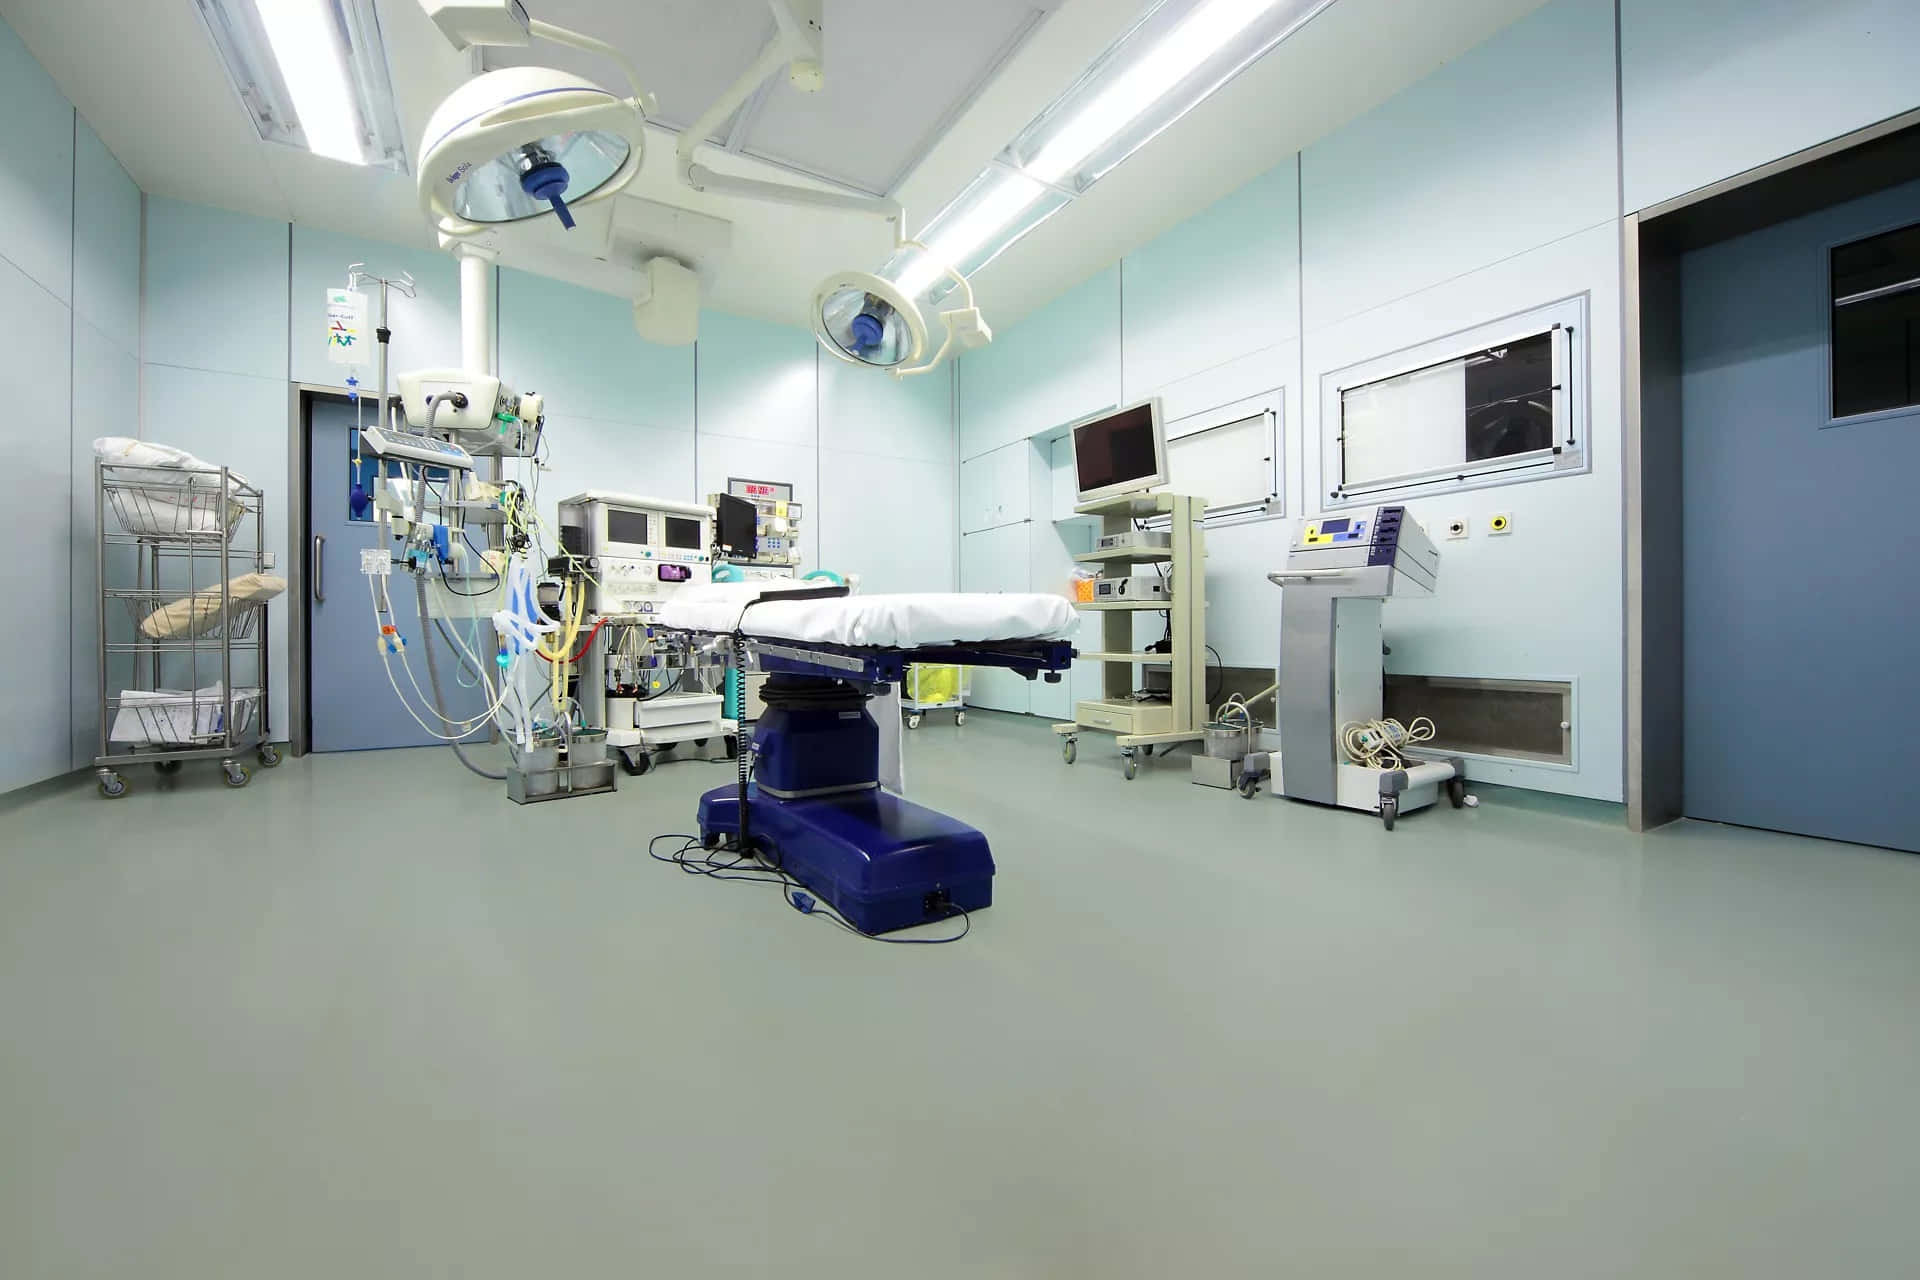 A Hospital Room With A Machine And Equipment